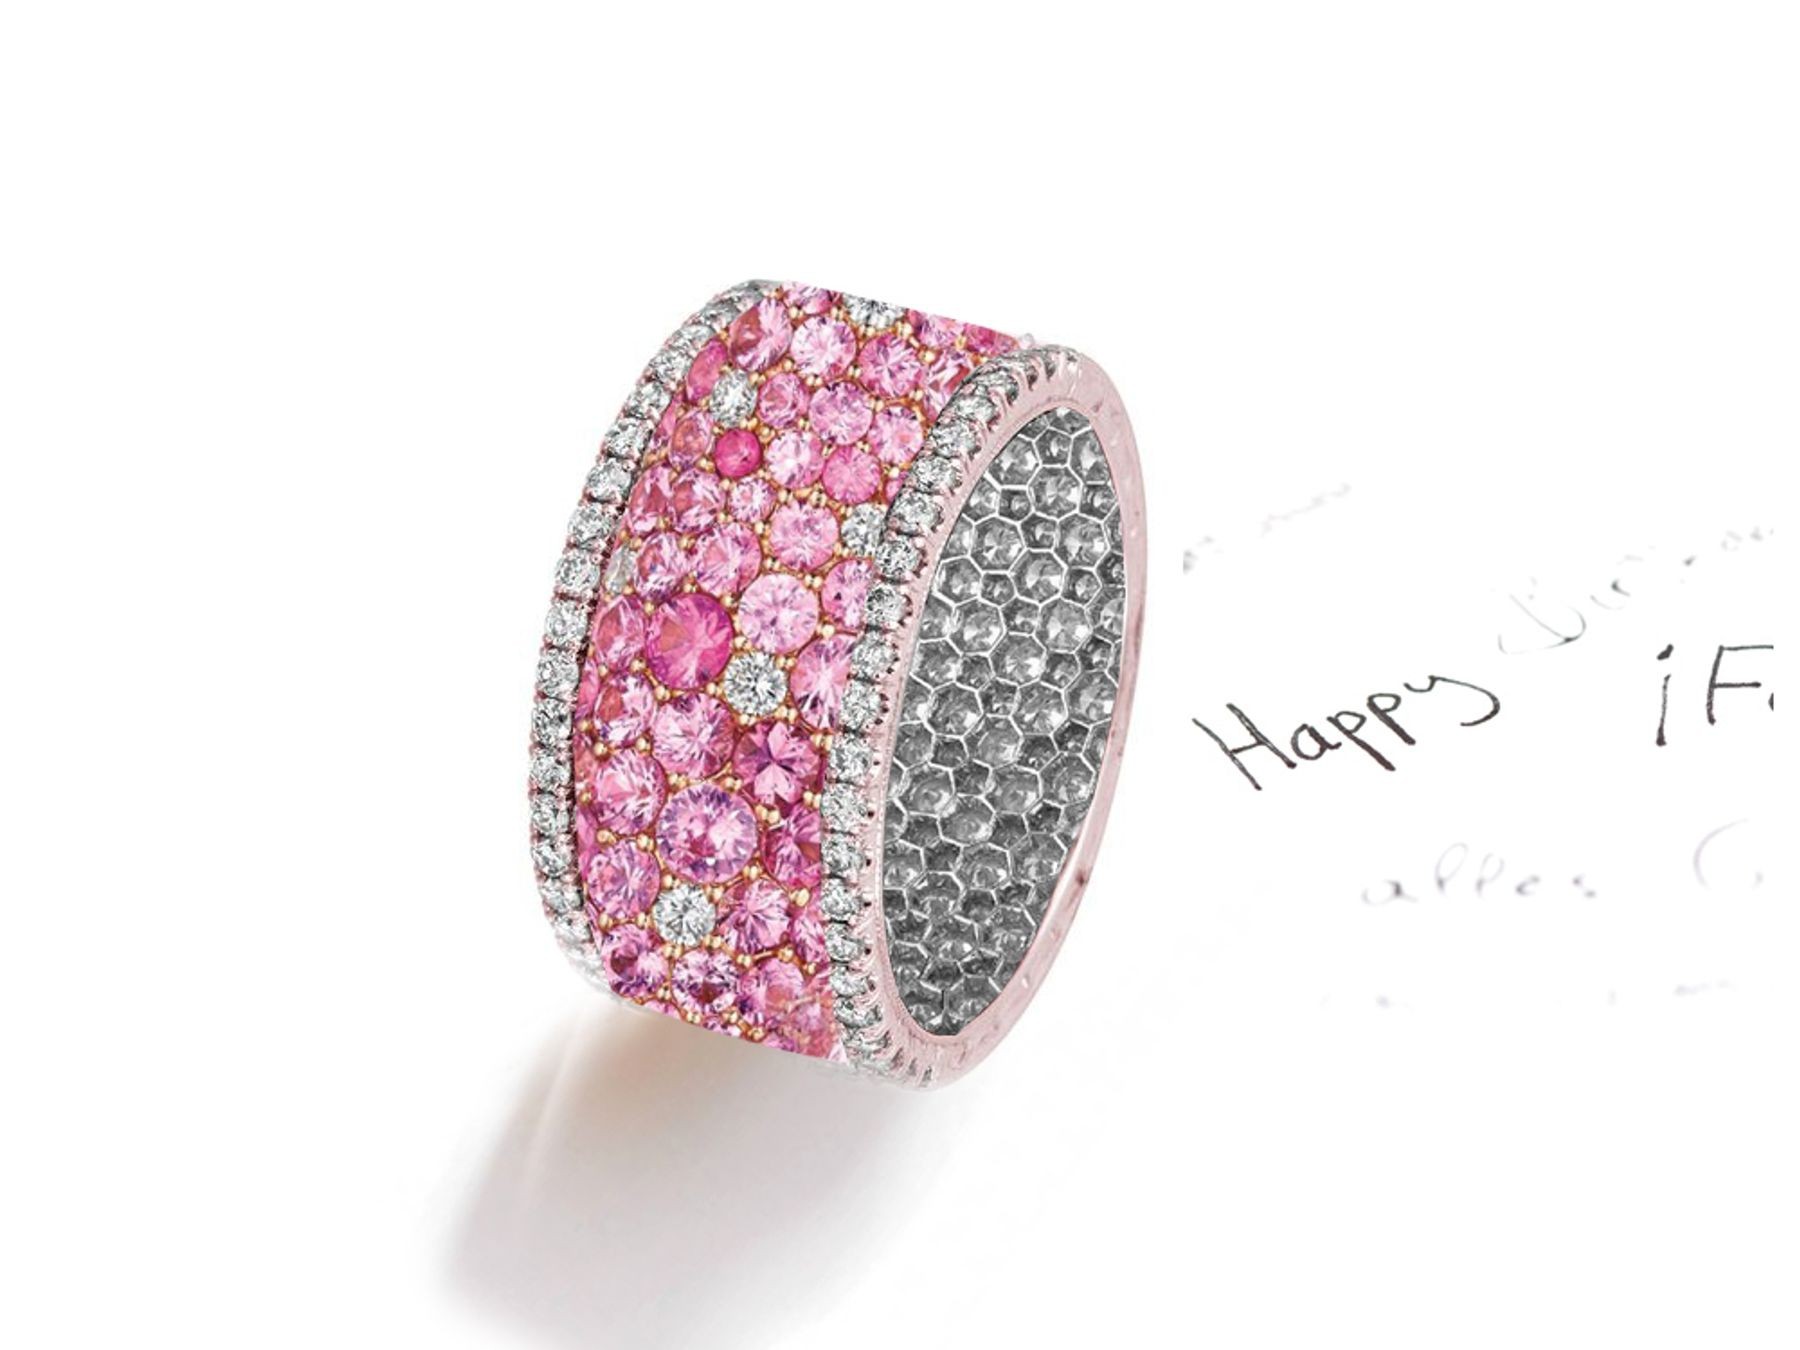 Made to Order Brilliant Cut Round Diamonds & Pink Sapphires Eternity Band Rings